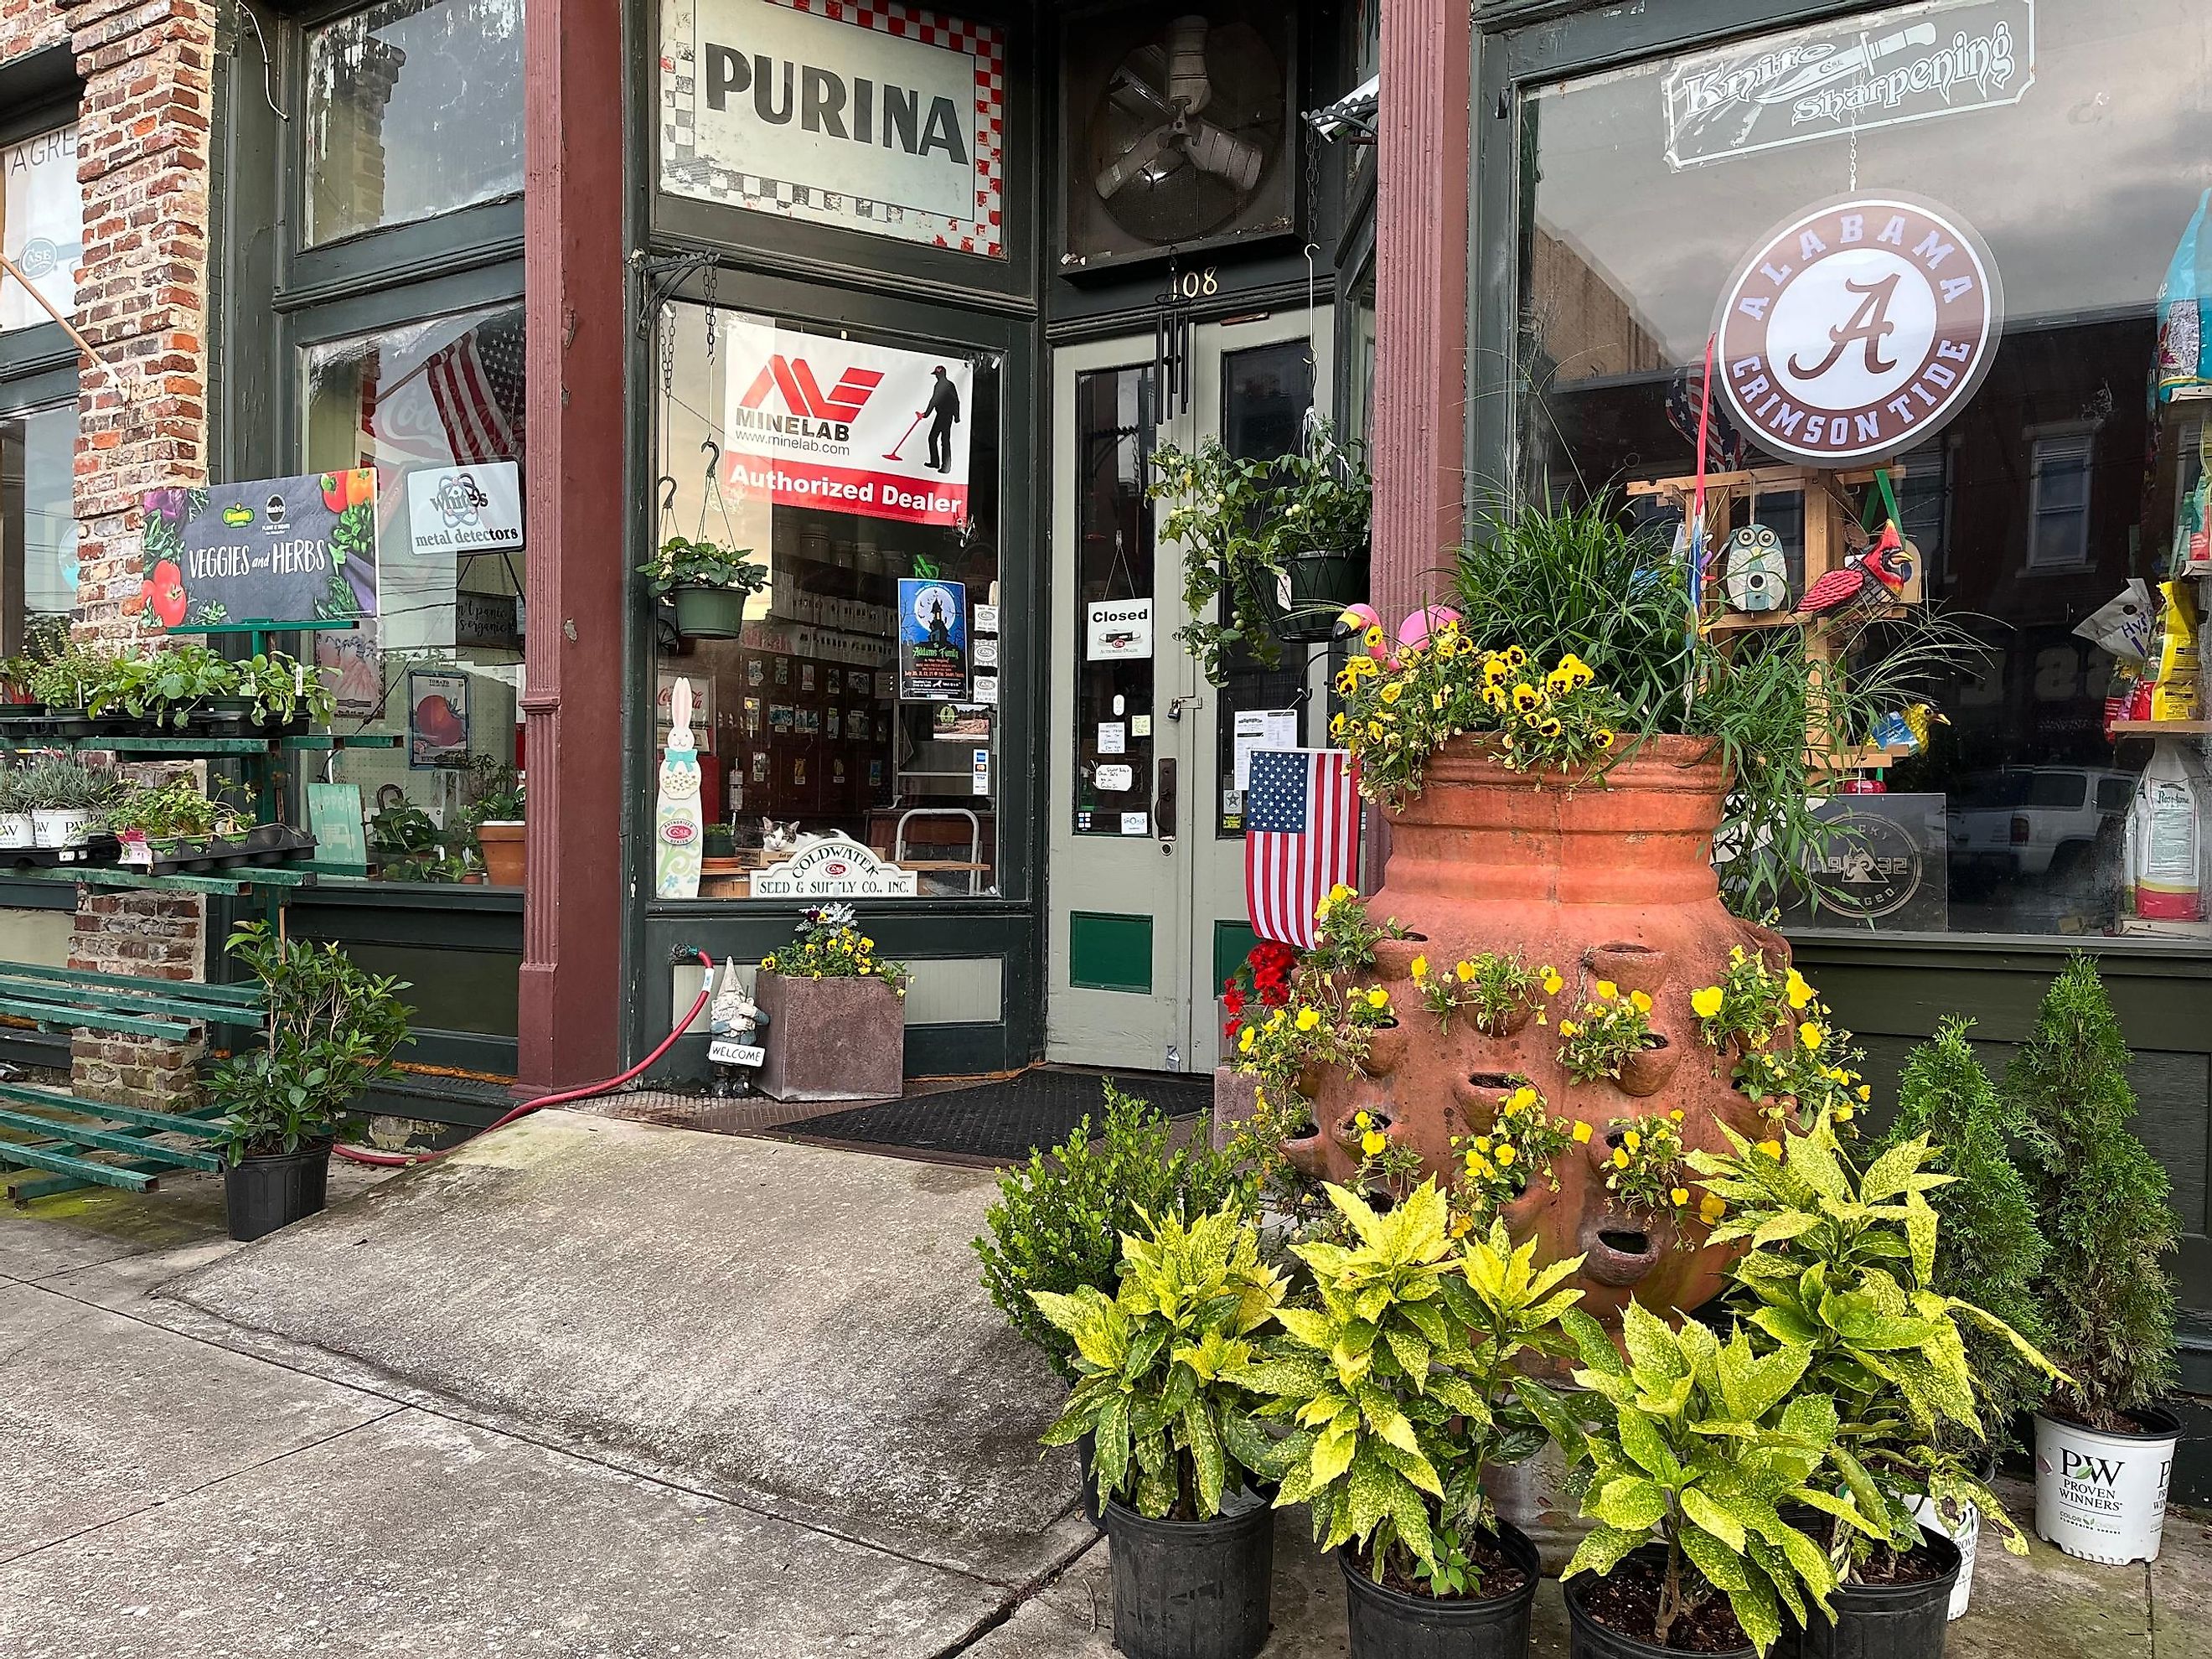  Scenes from downtown Tuscumbia, Alabama - shops and restaurants